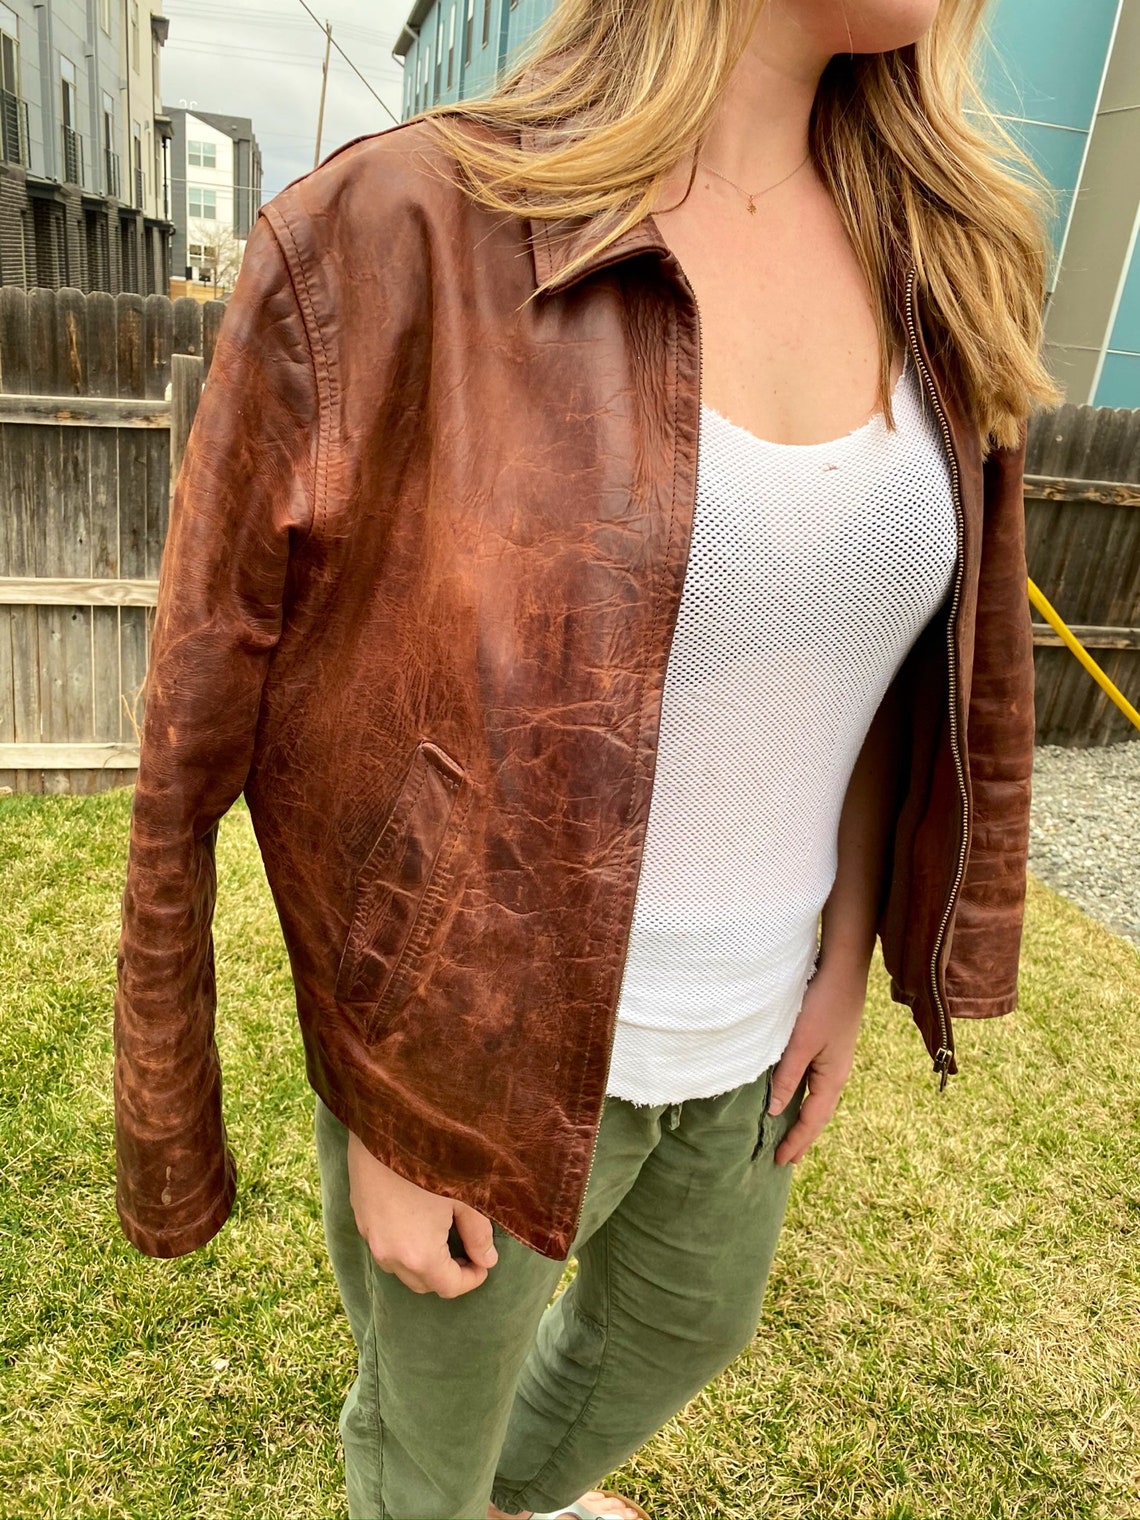 wifey leather jacket facial Sex Images Hq